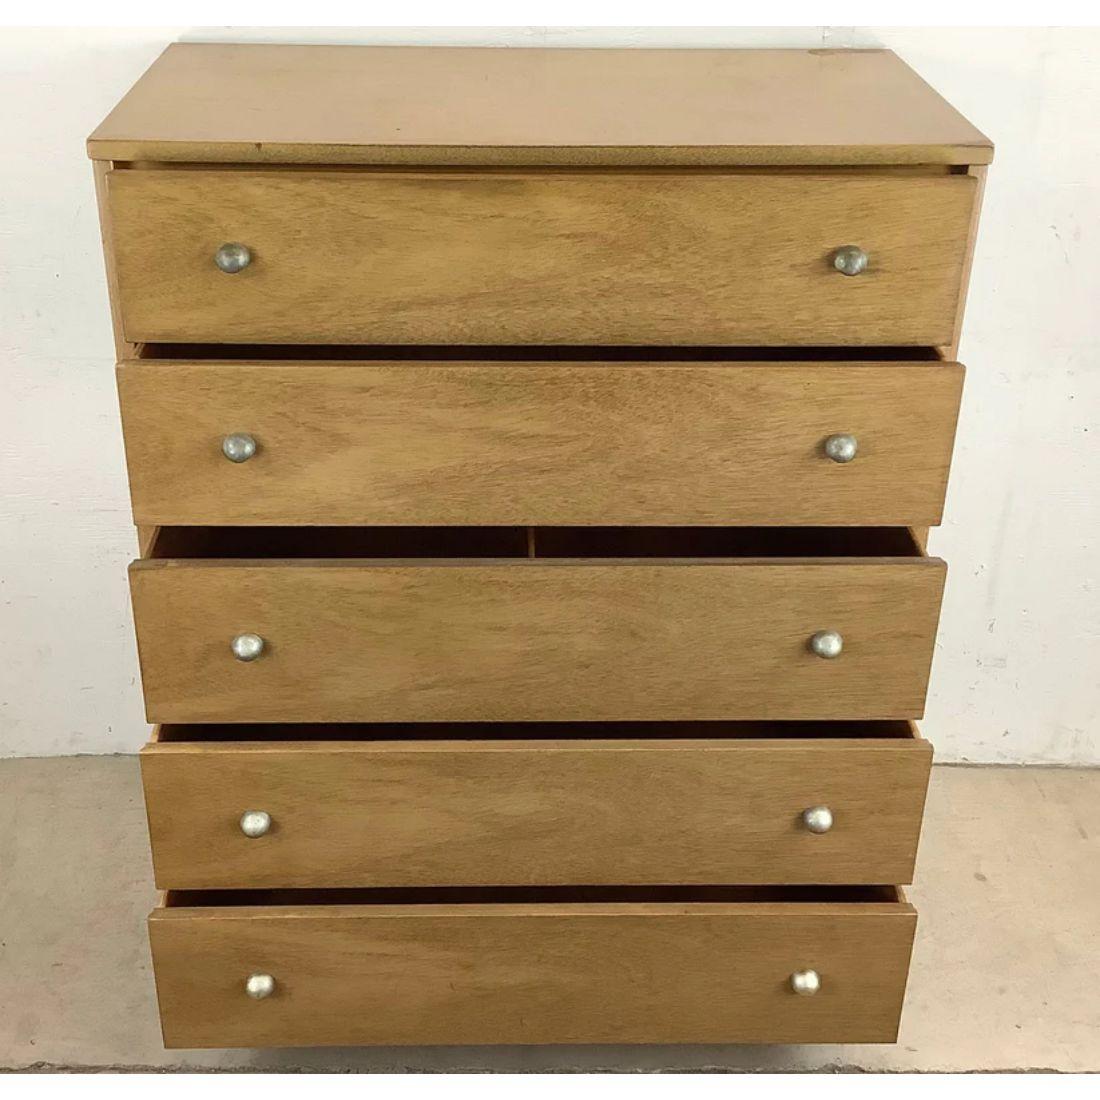 This unique vintage highboy dresser from 